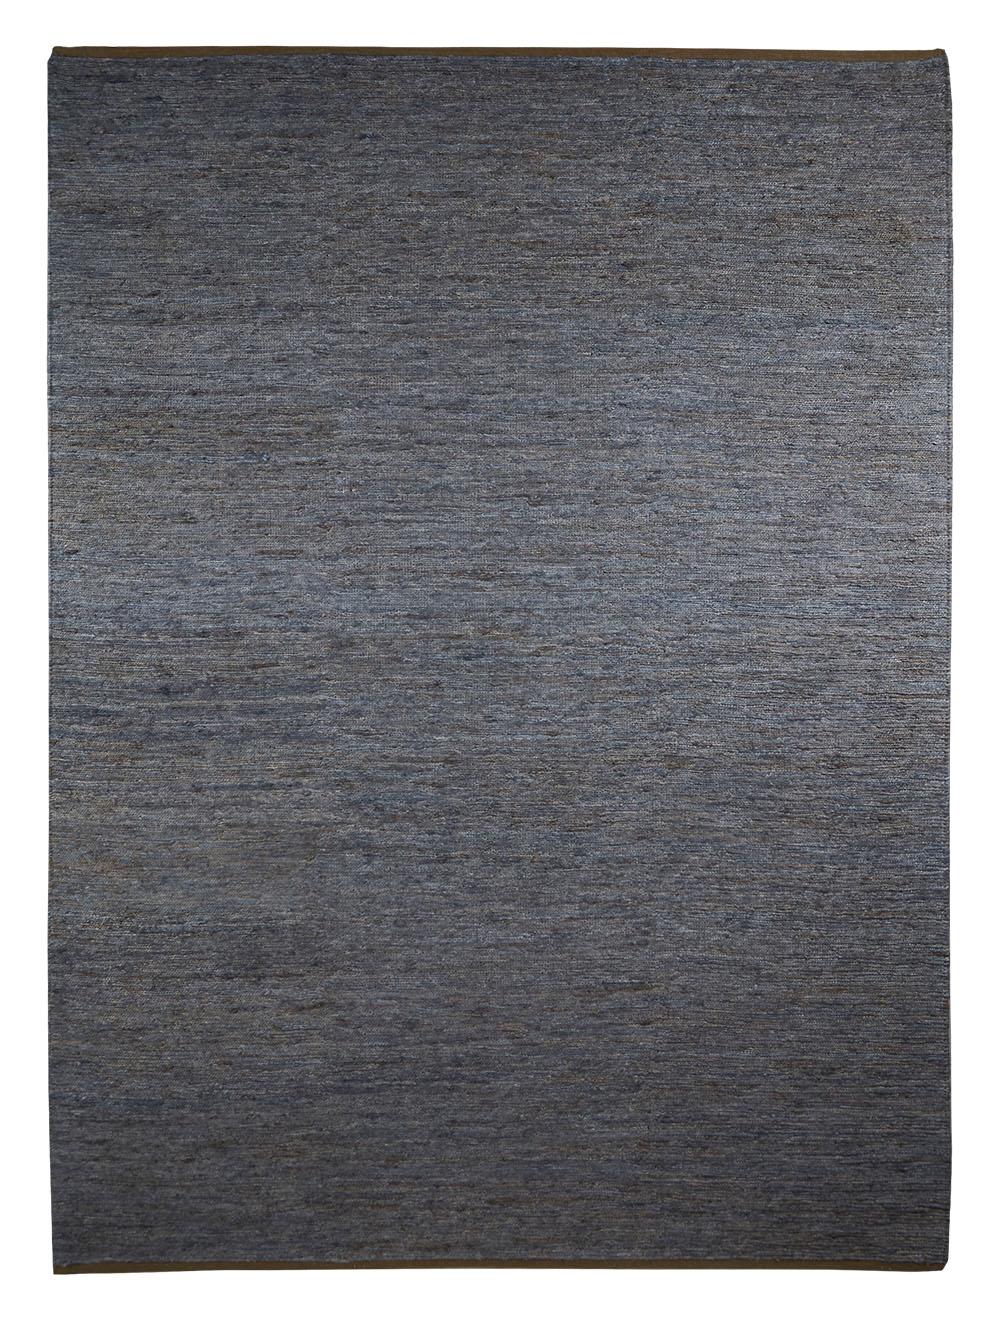 Navy Sumace carpet by Massimo Copenhagen
Handknotted
Materials: 100% Hemp
Dimensions: W 250 x H 300 cm
Available colors: Natural, natural with fringes, black, black with fringes, and navy.
Other dimensions are available: 170 x 240 cm, 200 x